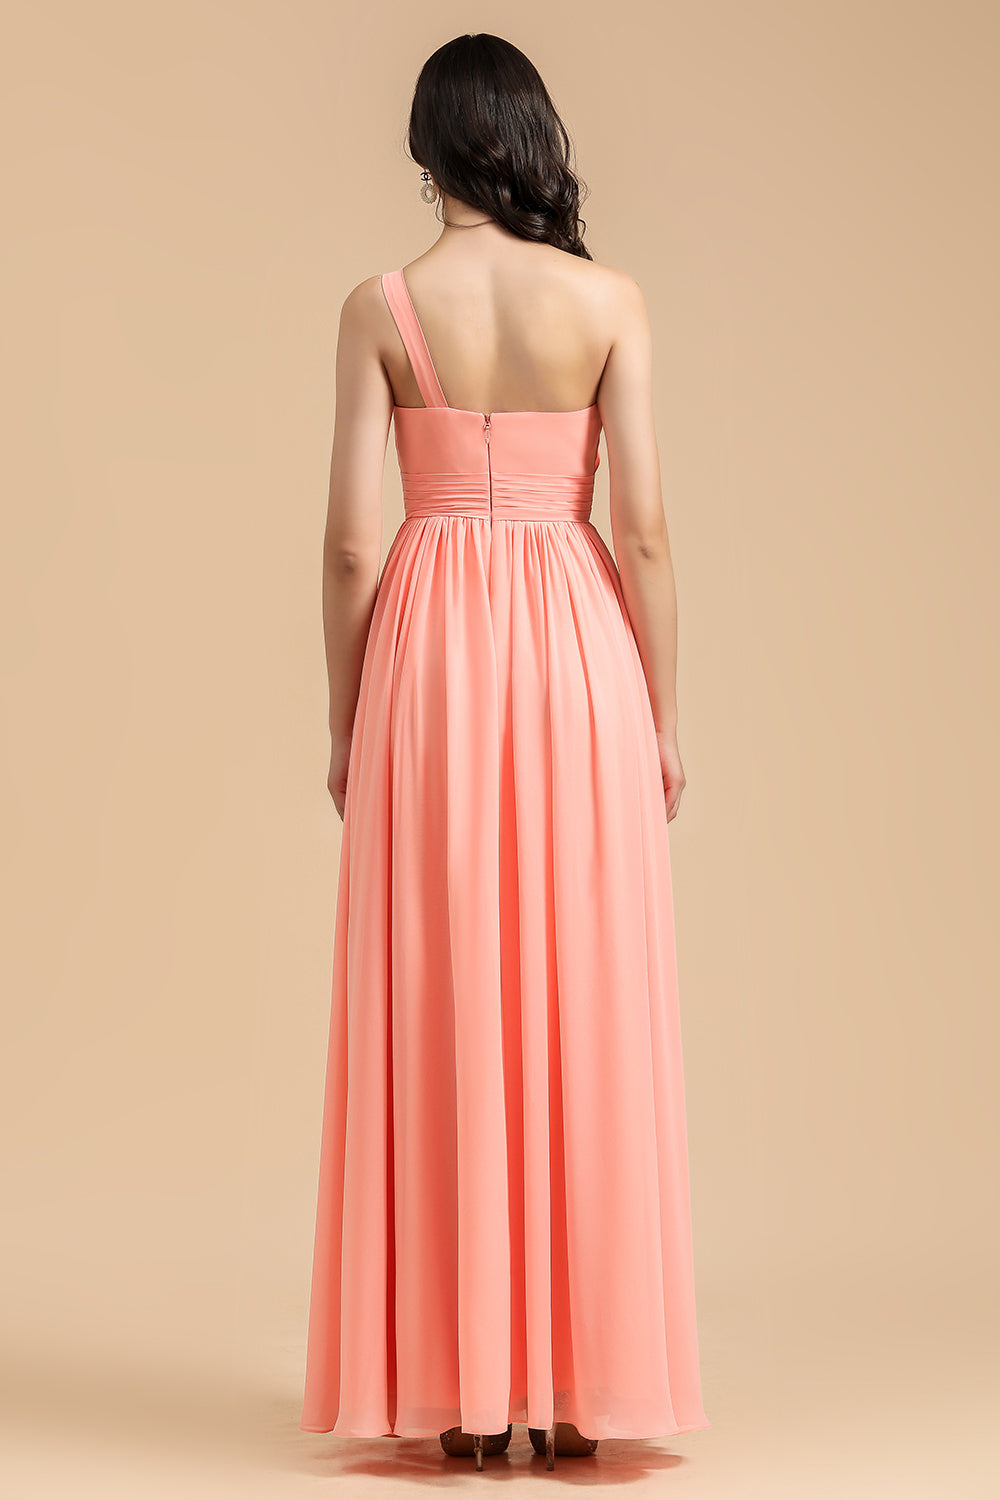 Load image into Gallery viewer, Elegant A-line One Shoulder Coral Chiffon Long Bridesmaid Dress-27dress
